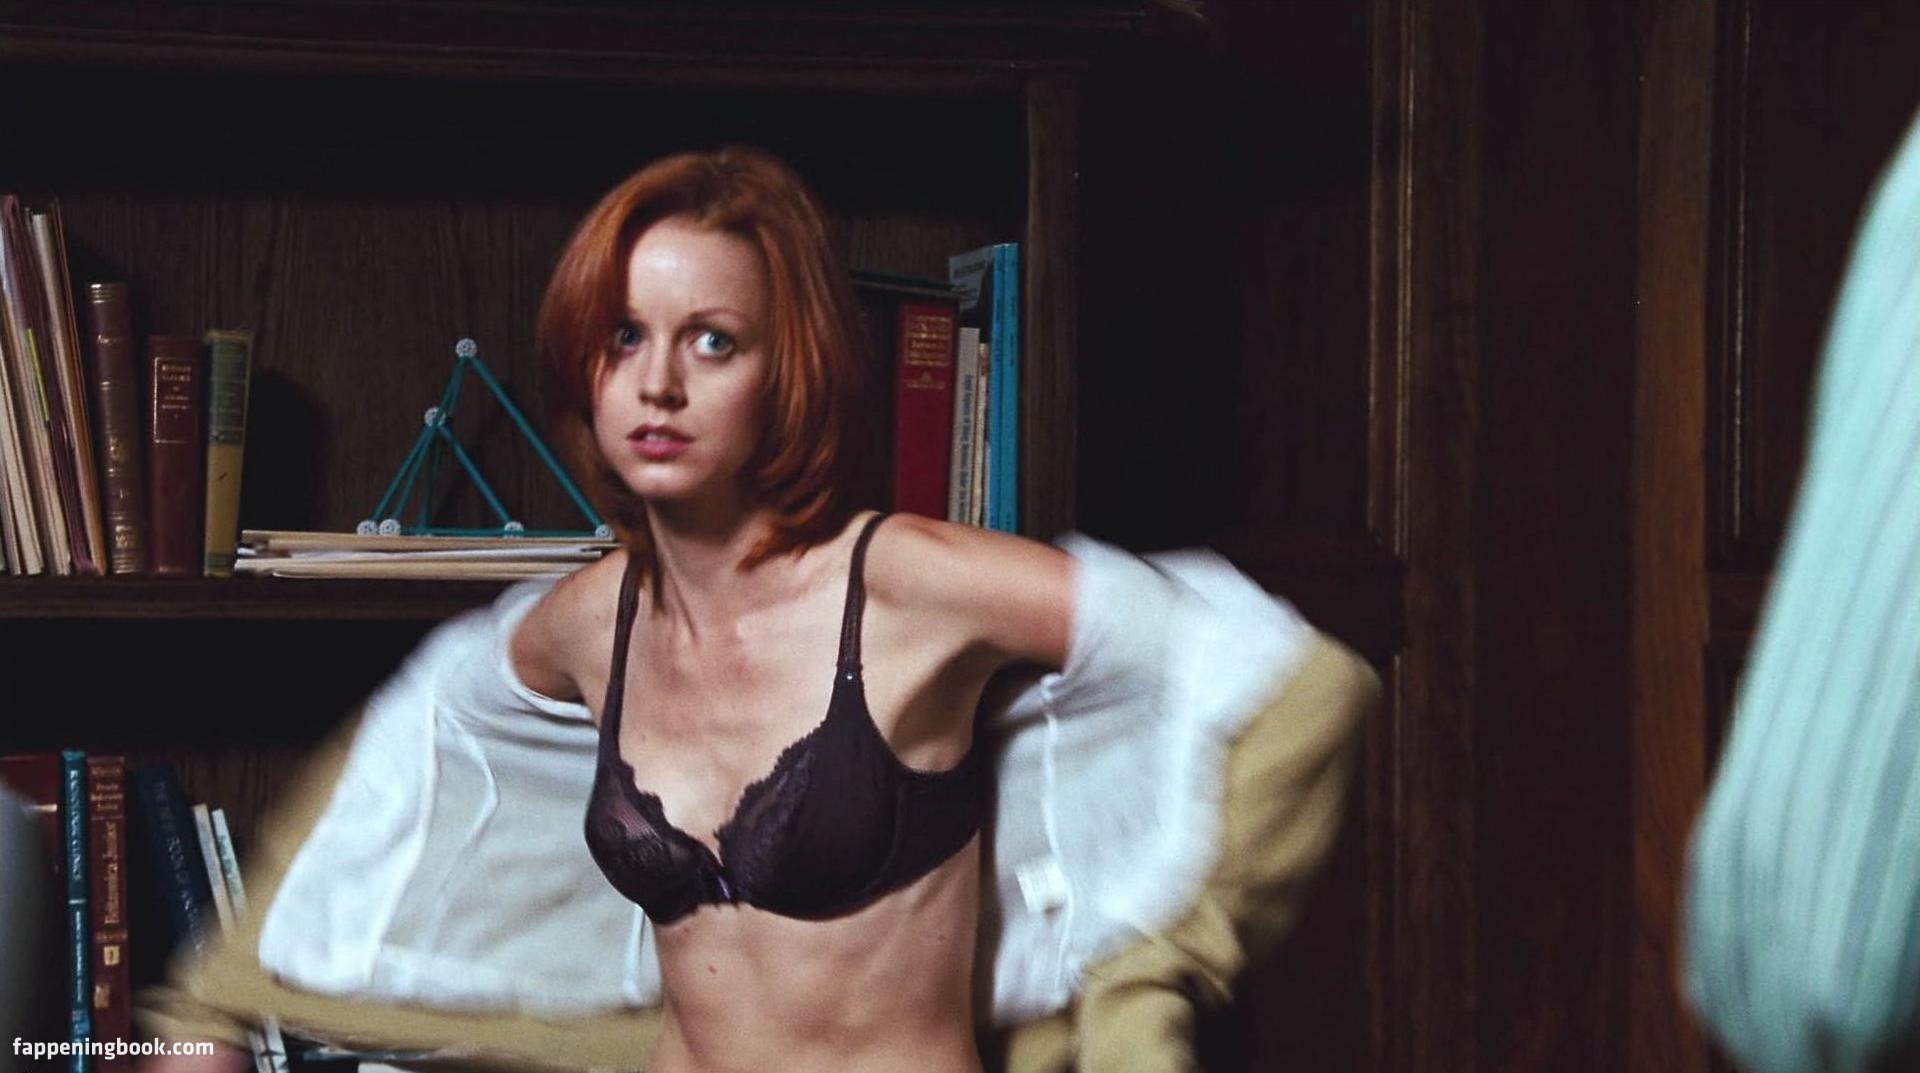 Lindy Booth Nude, The Fappening - Photo #344580 - FappeningBook.